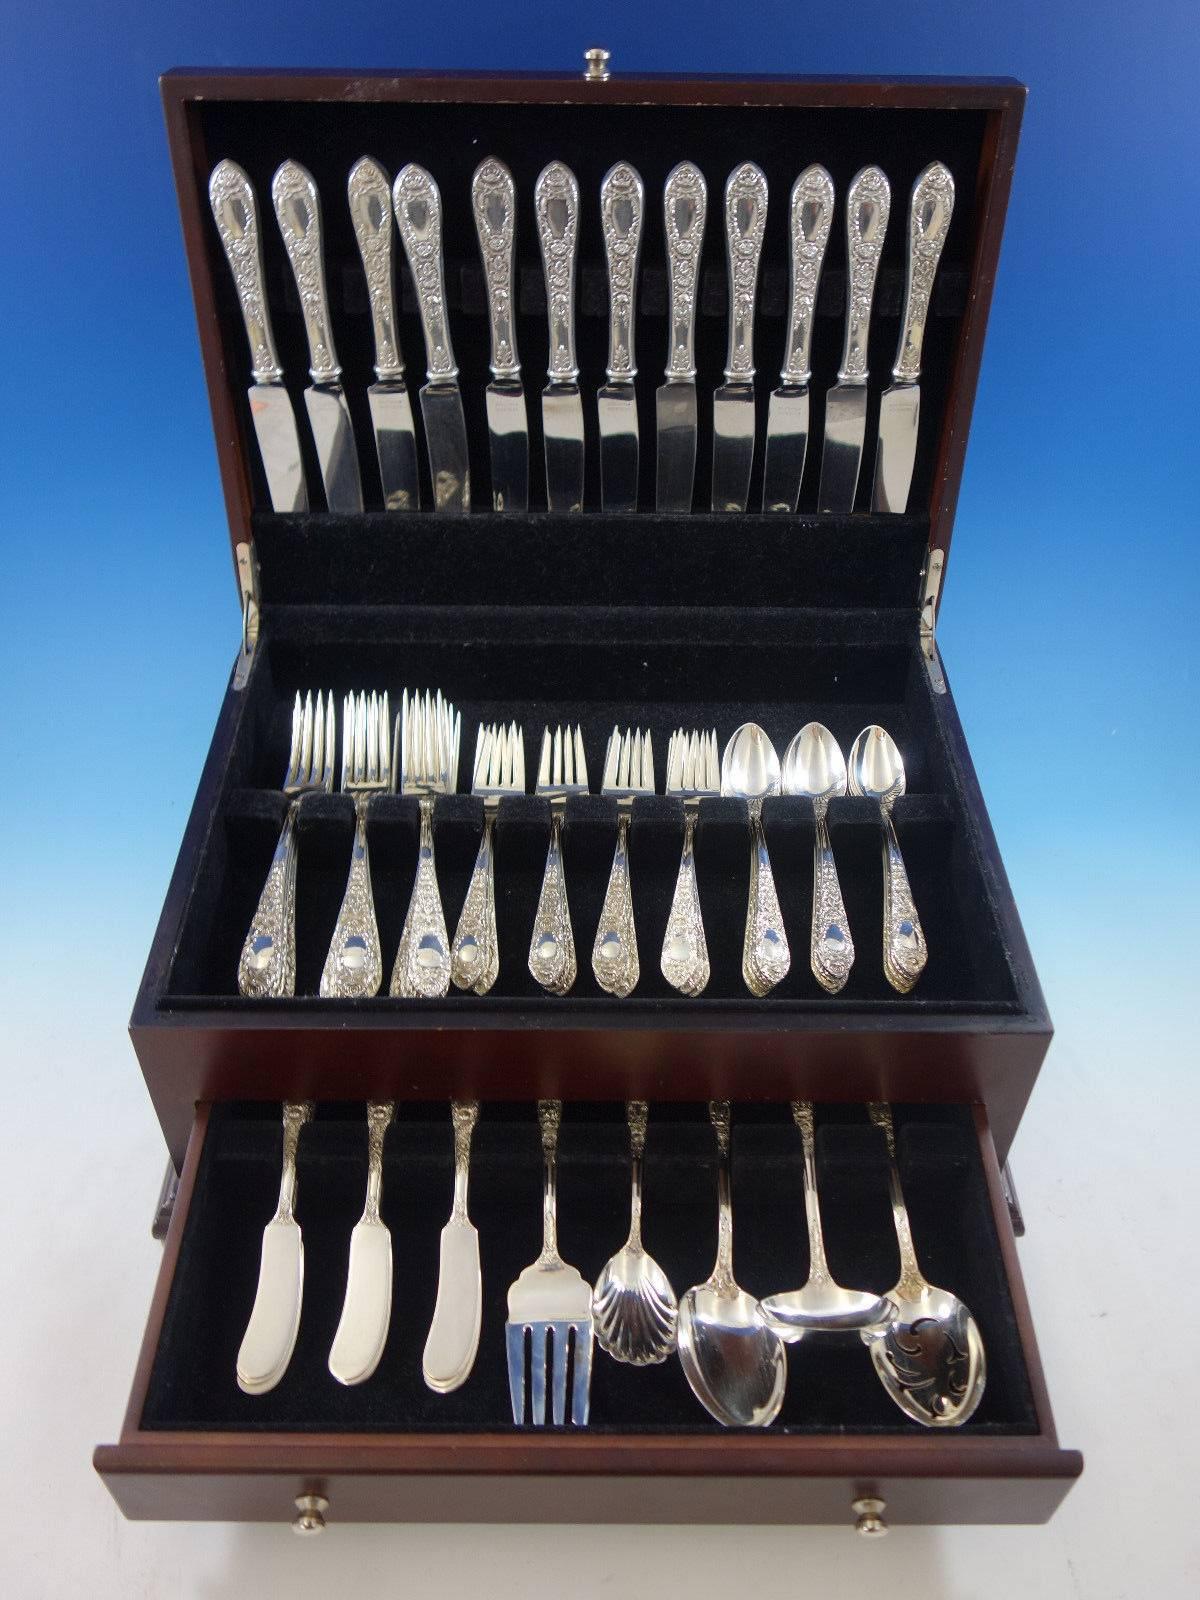 Rose by Kirk sterling silver flatware set, 77 pieces. This set includes:

12 knives, 9 1/8